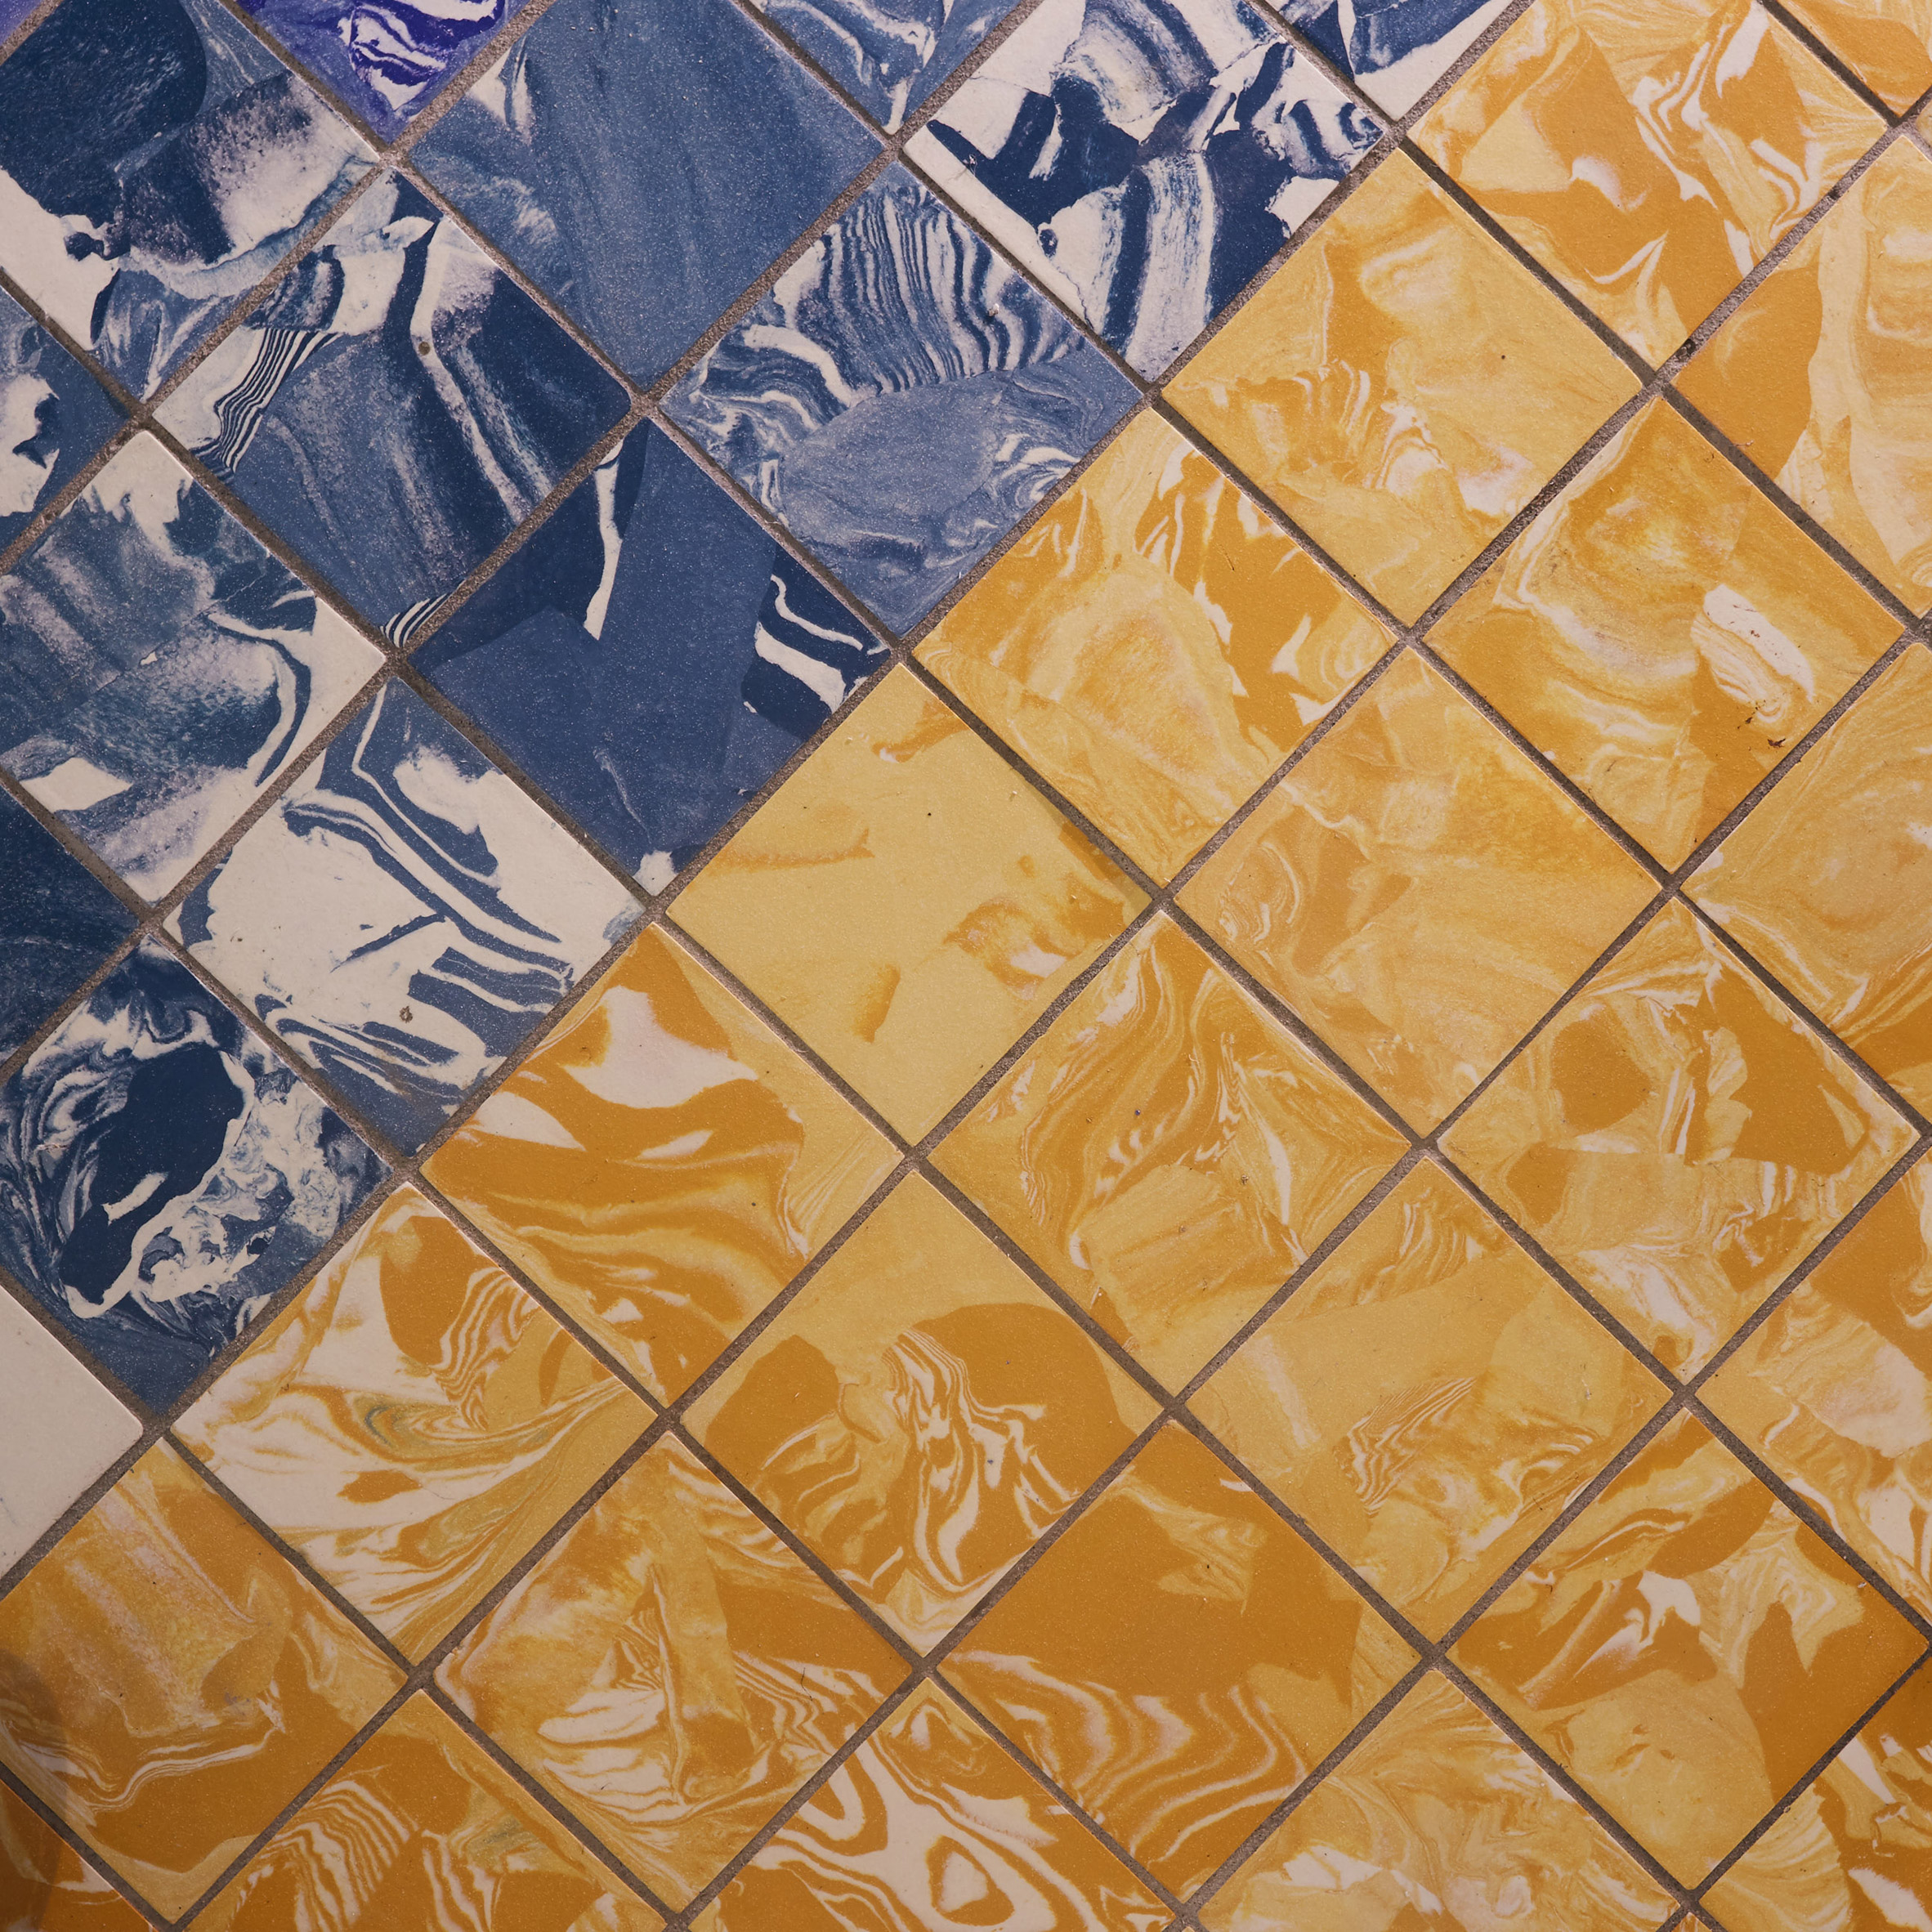 Assemble’s Granby workshop releases "extremely vibrant" tile collection